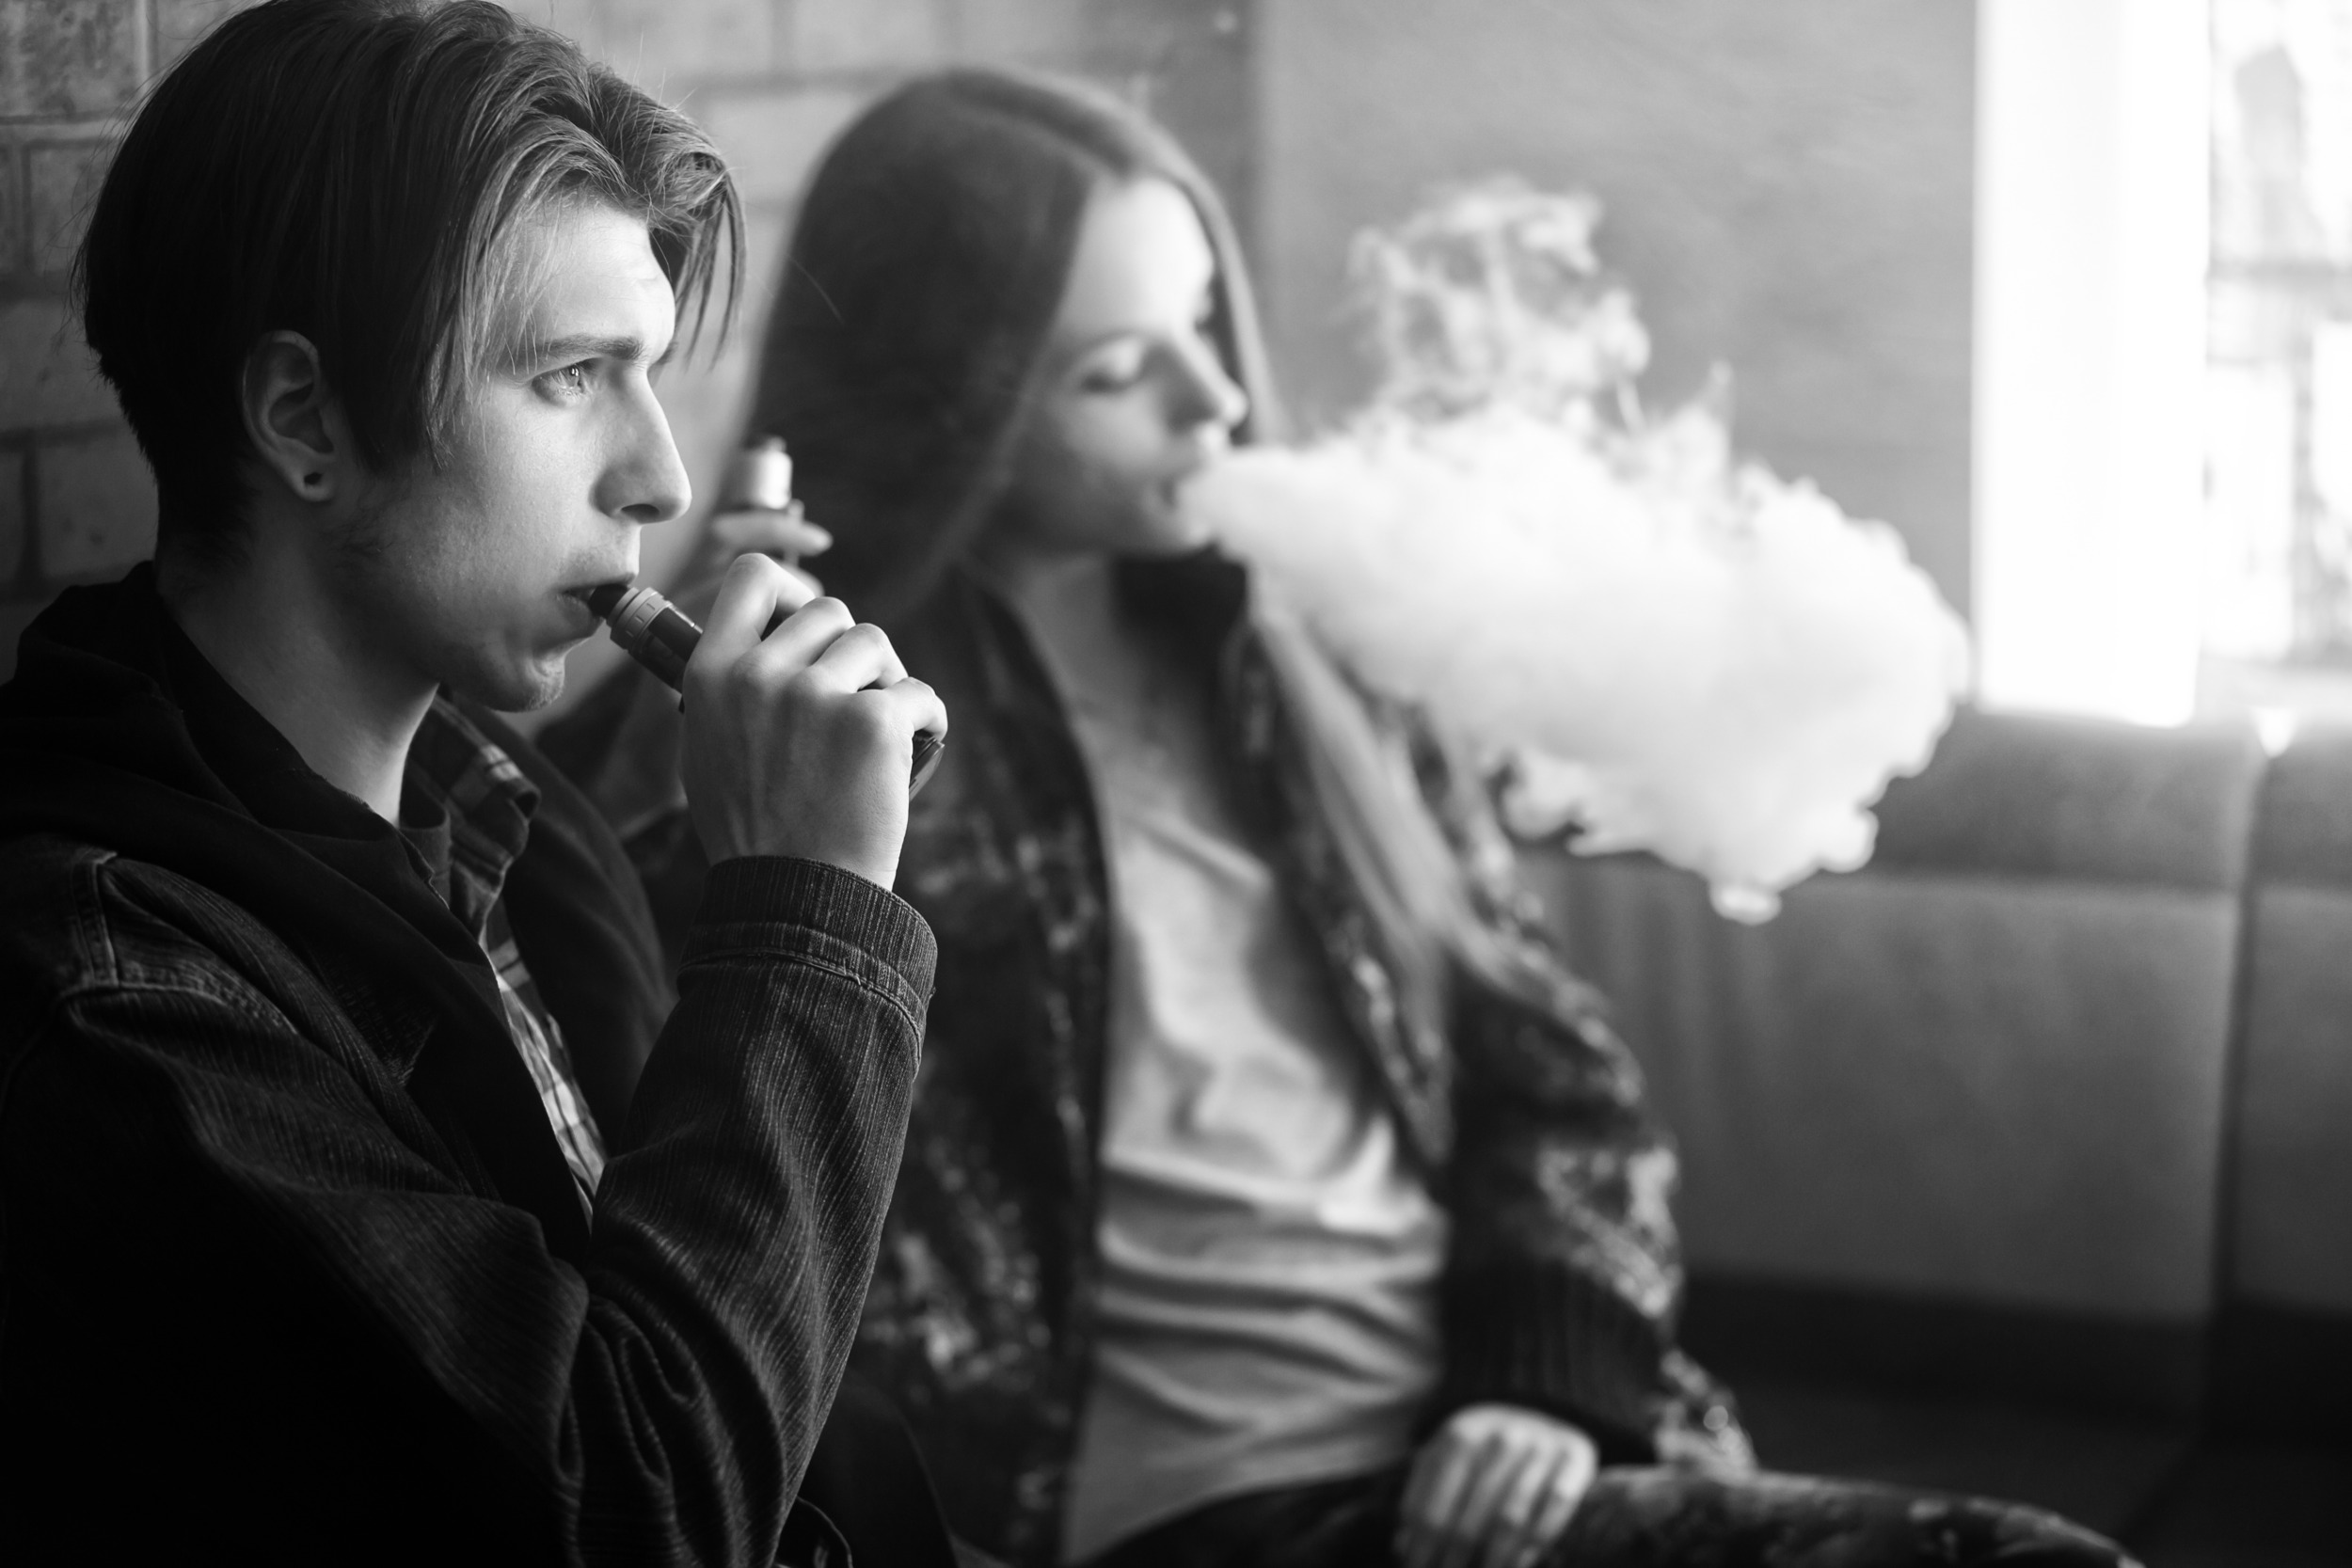 Colorado Vaping Lawsuit settlement: Black and white photo of two older teens sitting against brick wall smoking electronic cigarettes